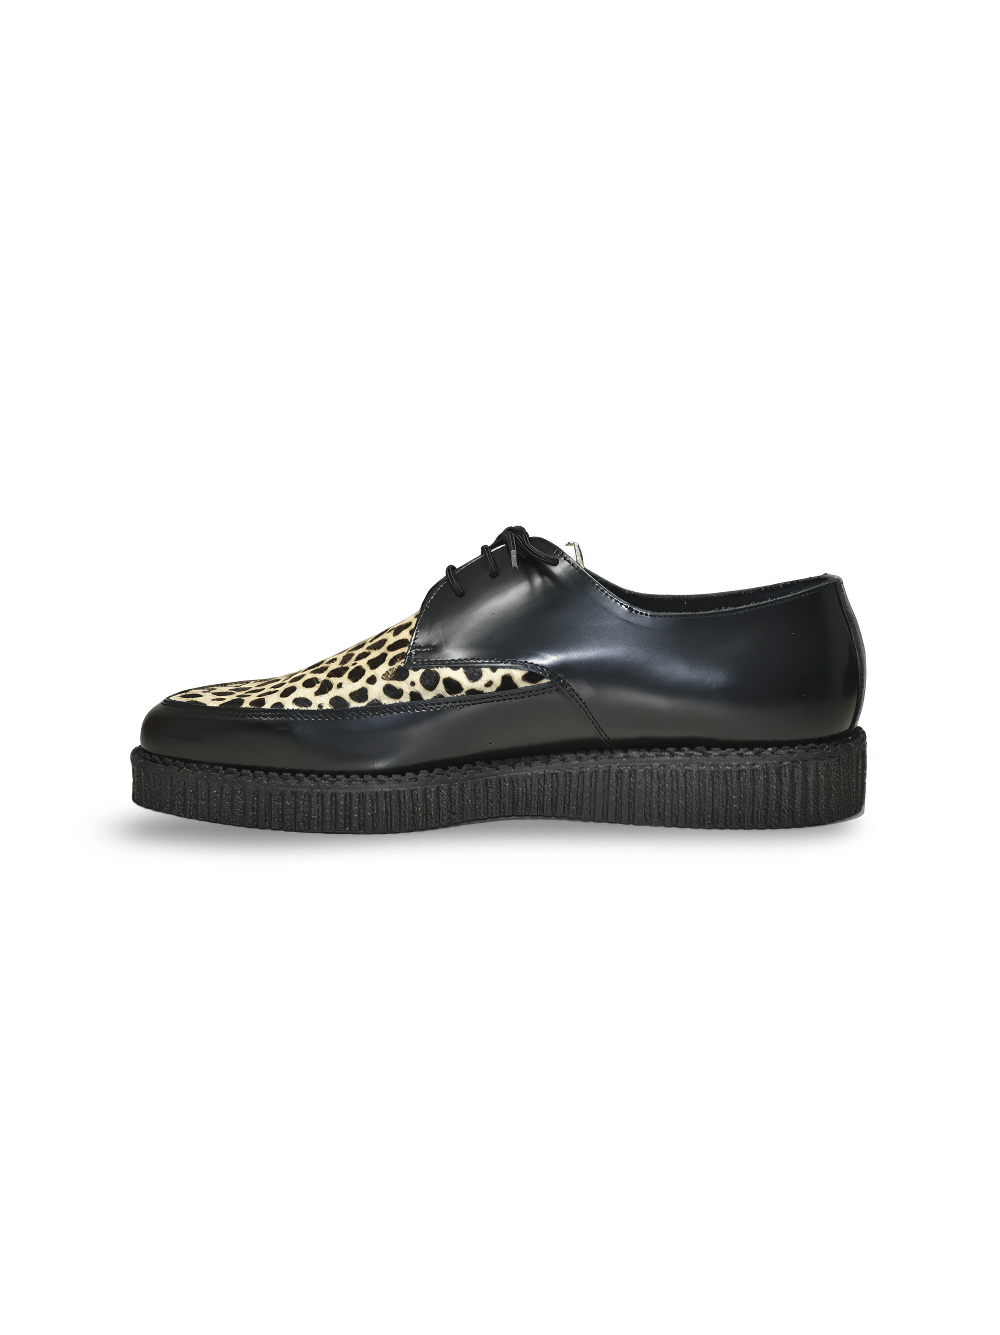 Markante spitze Creepers-Schuhe mit Leopardenmuster aus Fell